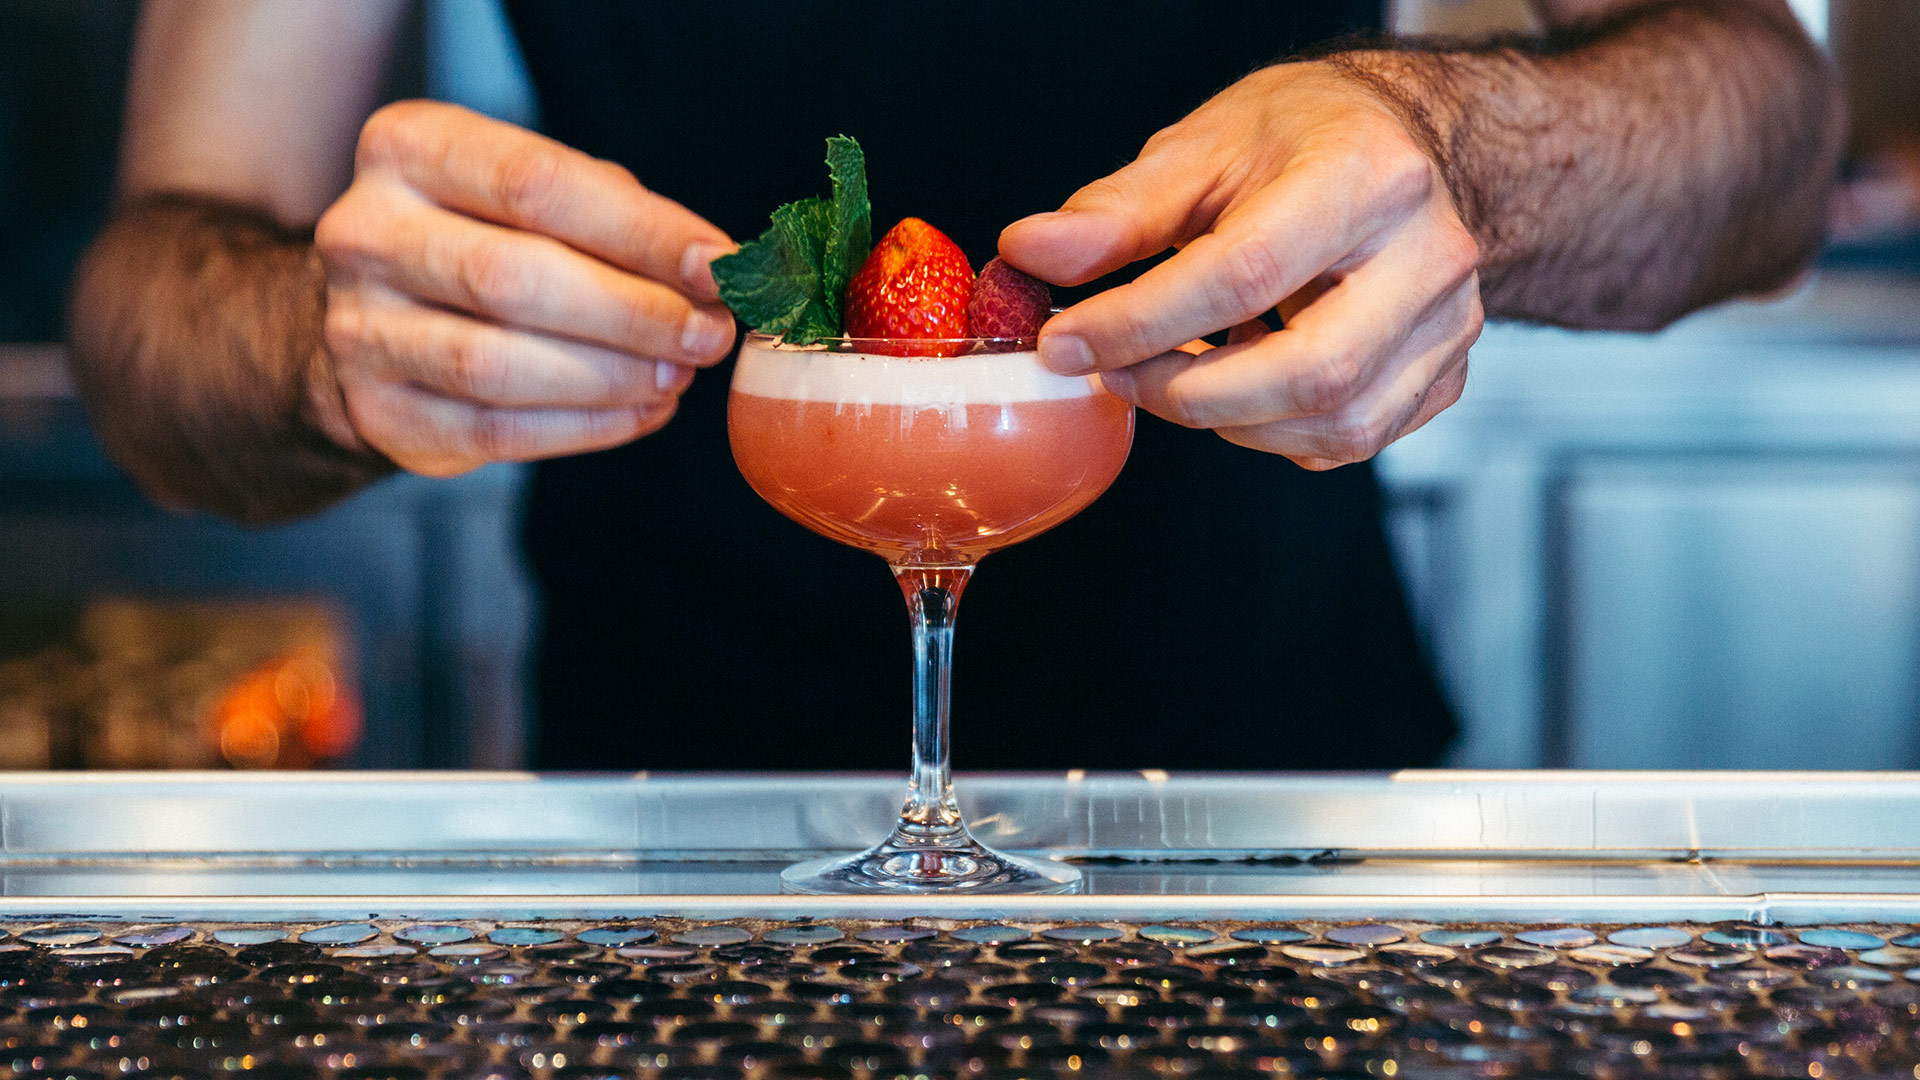 Hands finishing a cocktail with mint and berries